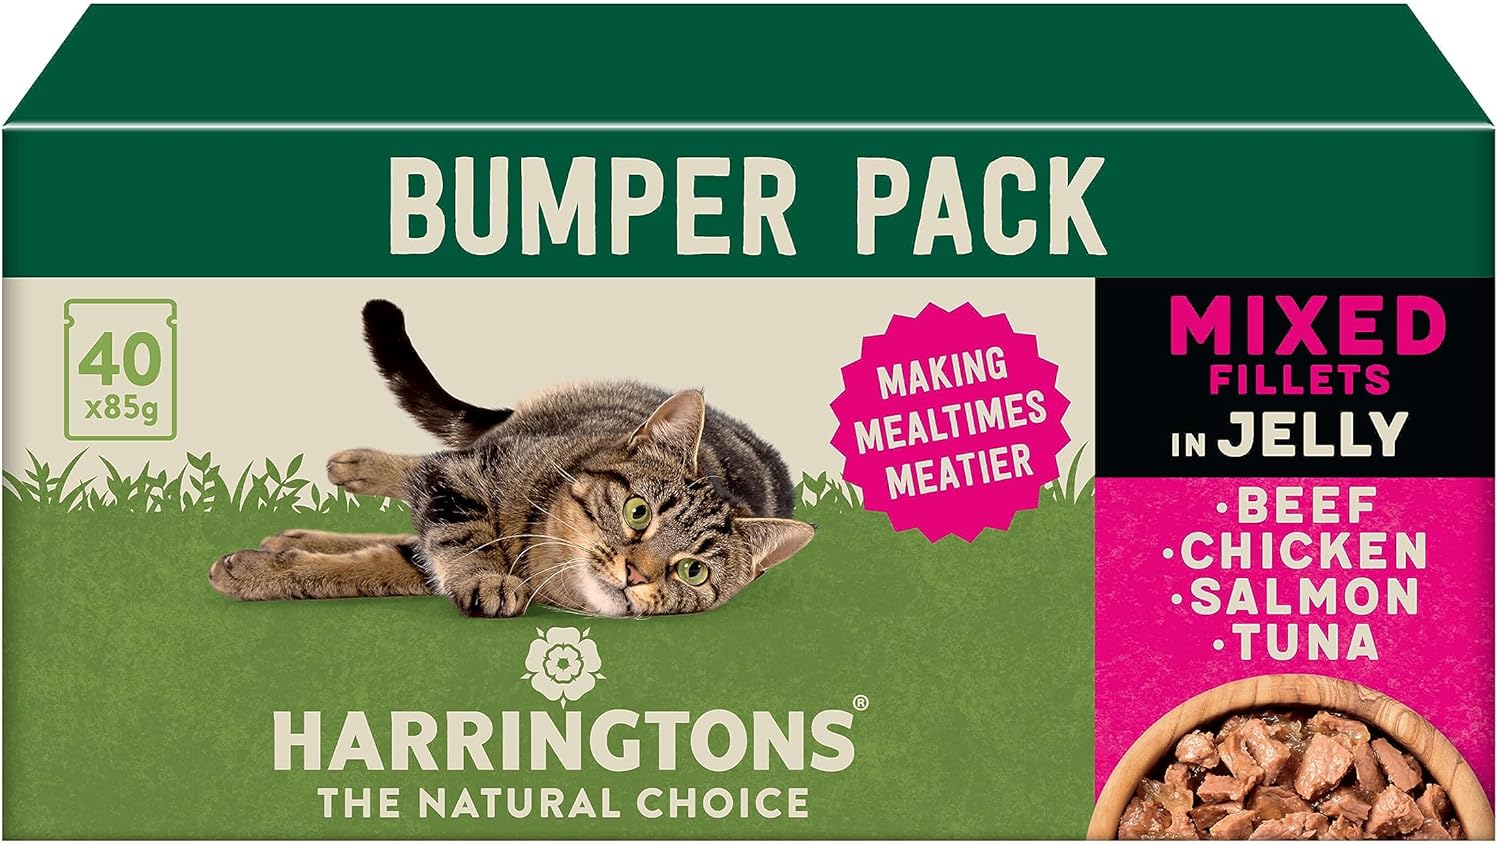 Harringtons Complete Wet Pouch Grain Free Hypoallergenic Adult Cat Food Mixed in Jelly Pack 40x85g - Beef, Chicken, Salmon & Tuna- Making Mealtimes Meatier?HARRWCATM-C40